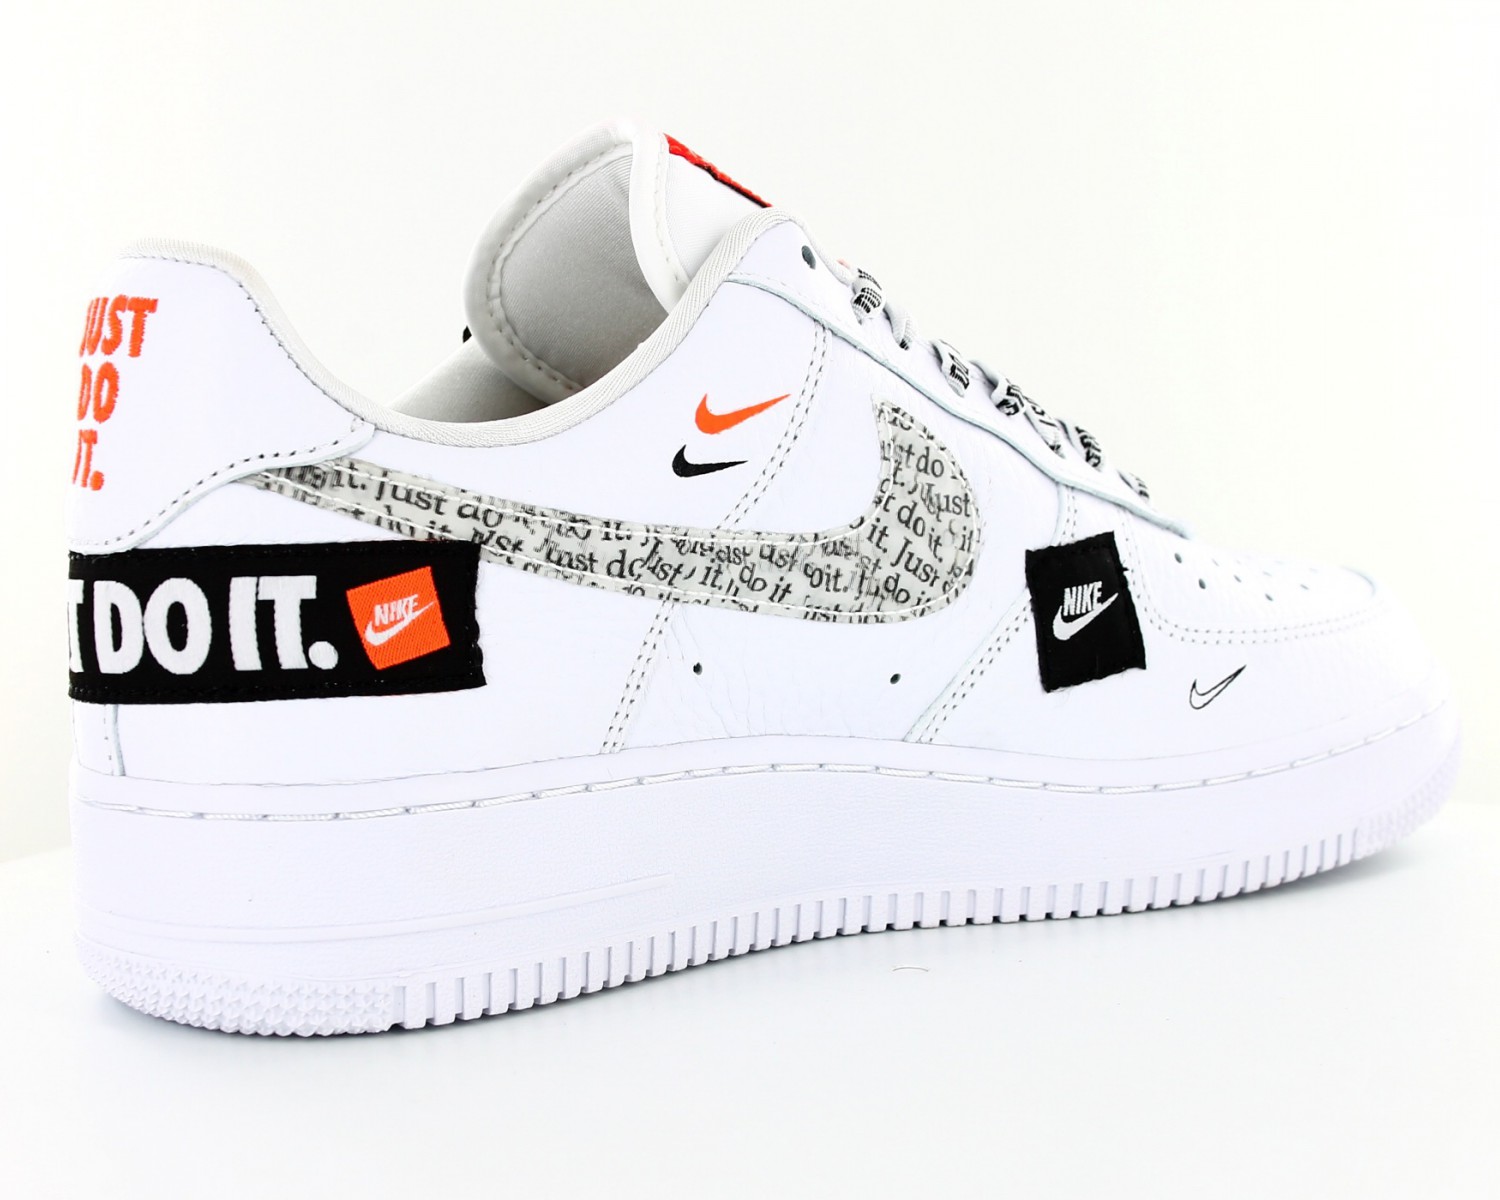 nike air force 1 femme just do it bbb13c